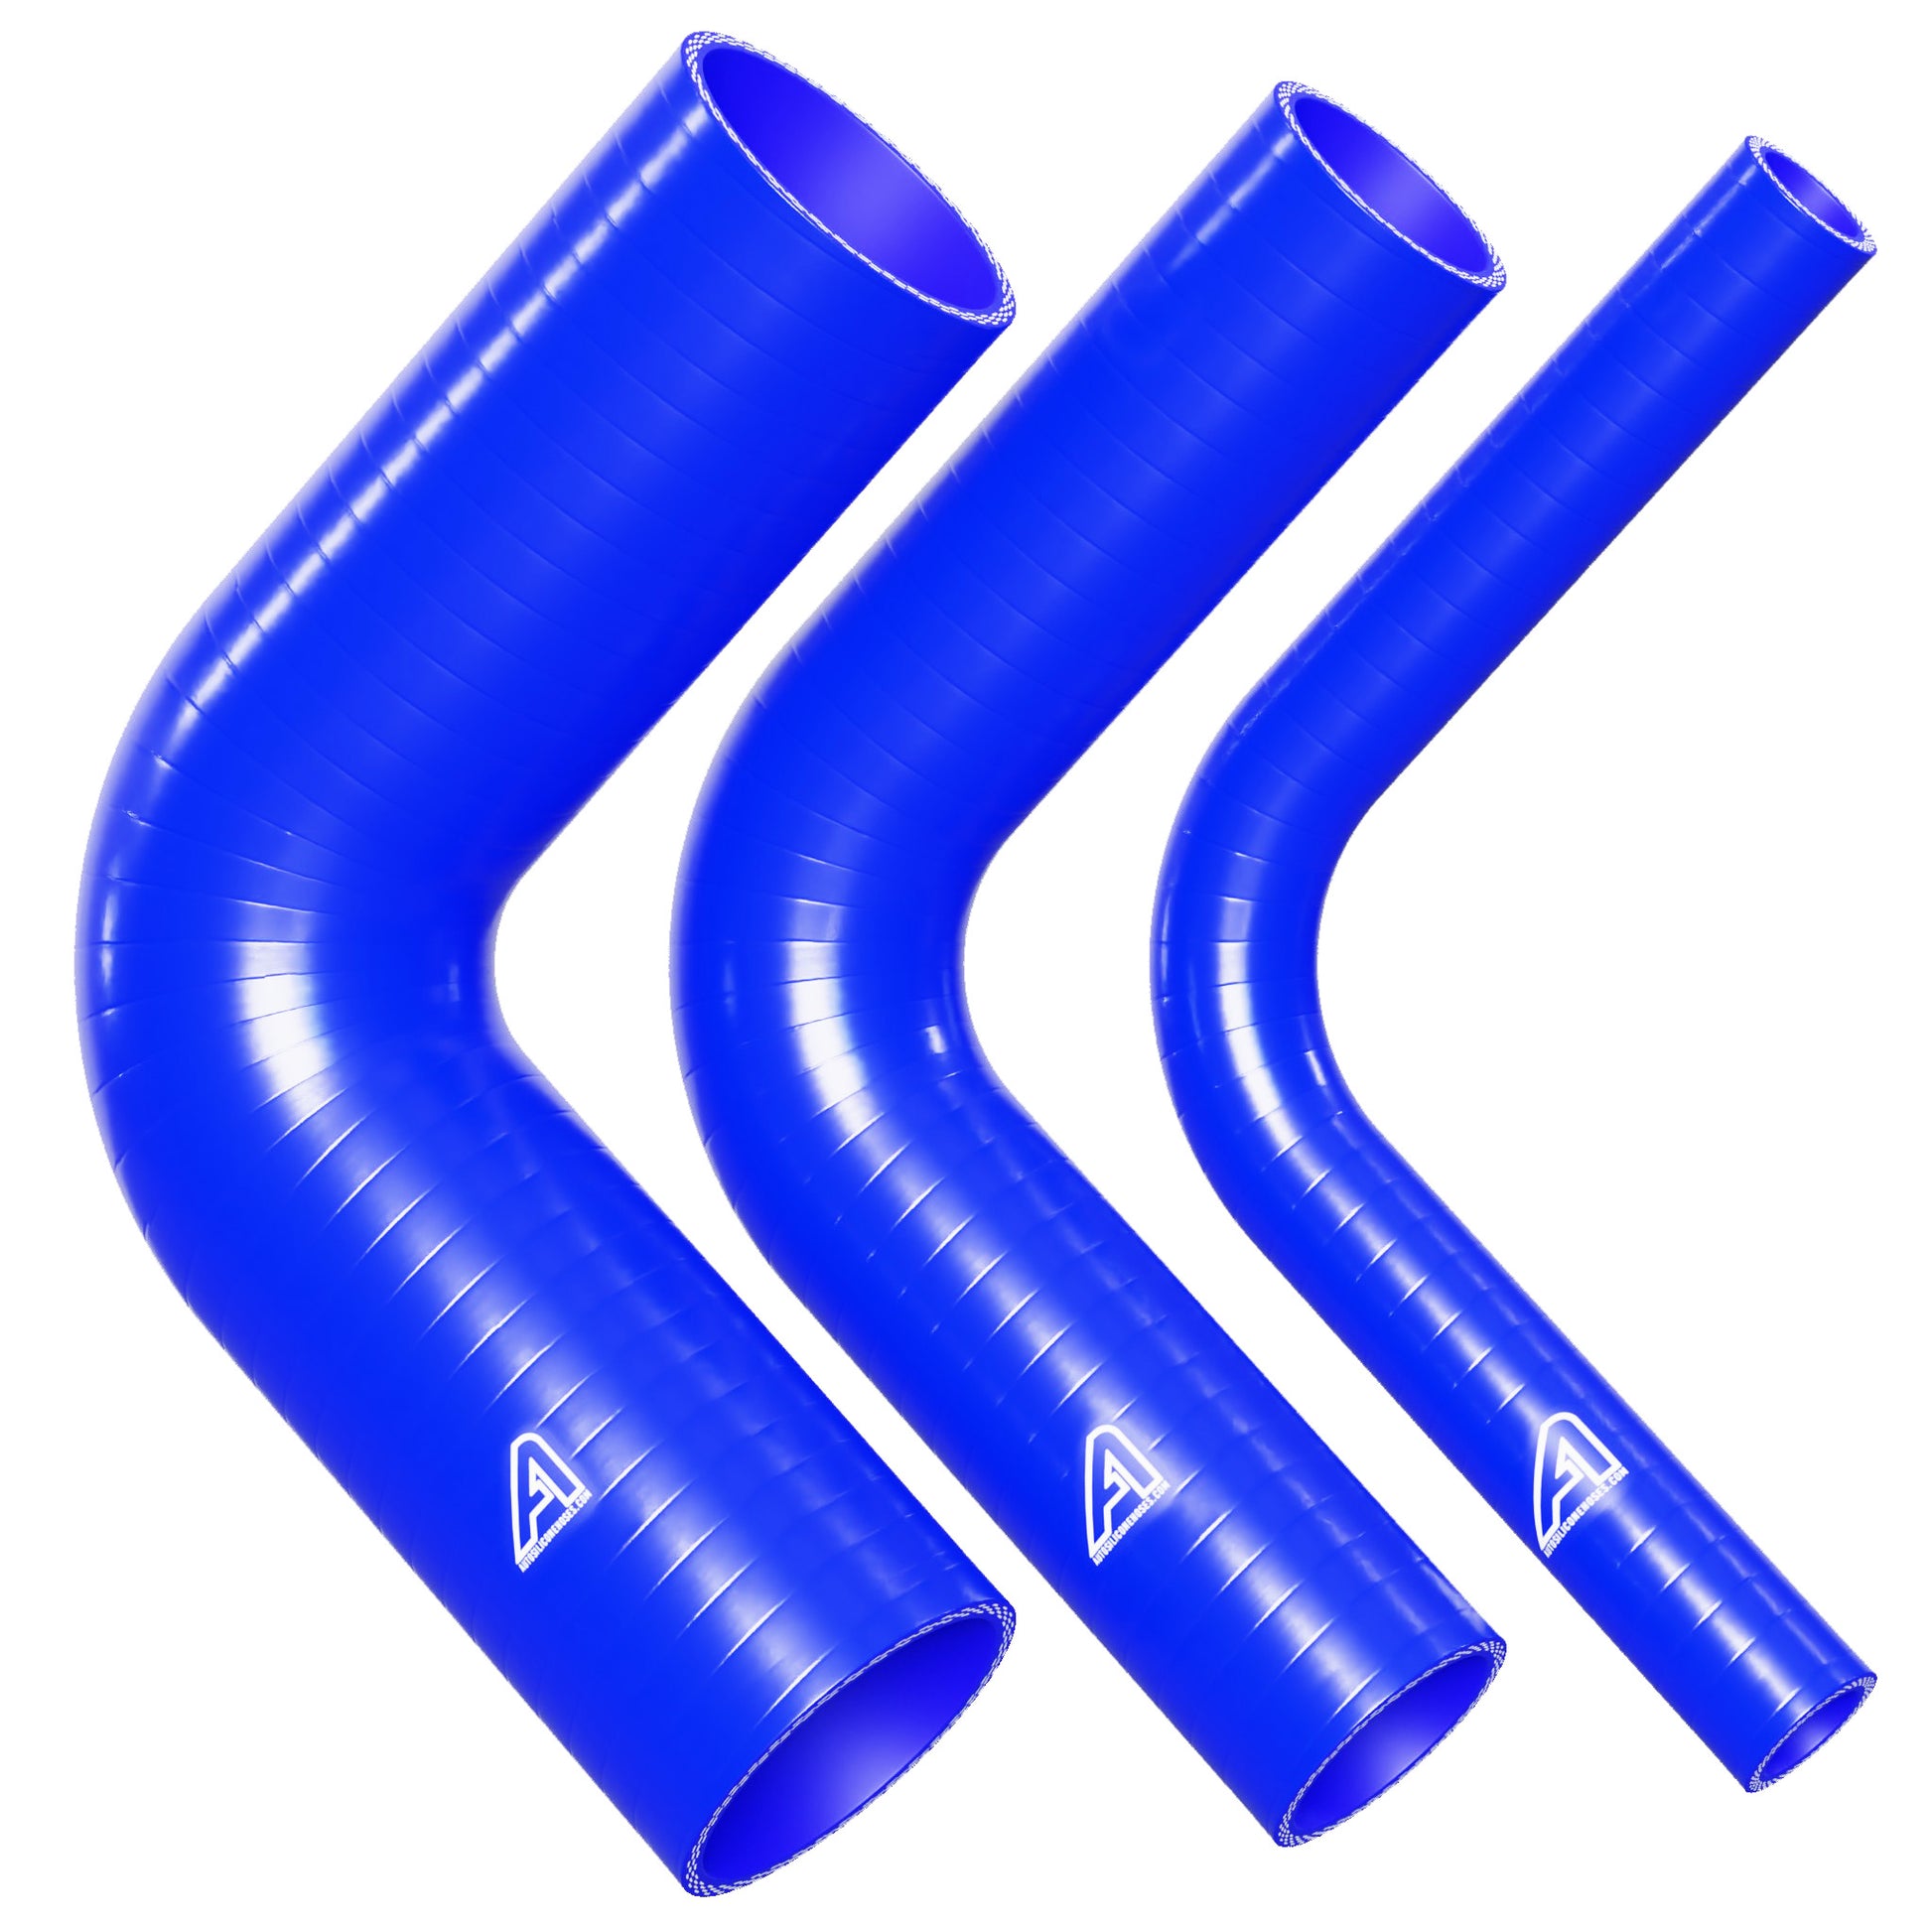 Automotive Silicone Hose Formed Reducer Elbow - 90 Degree - High